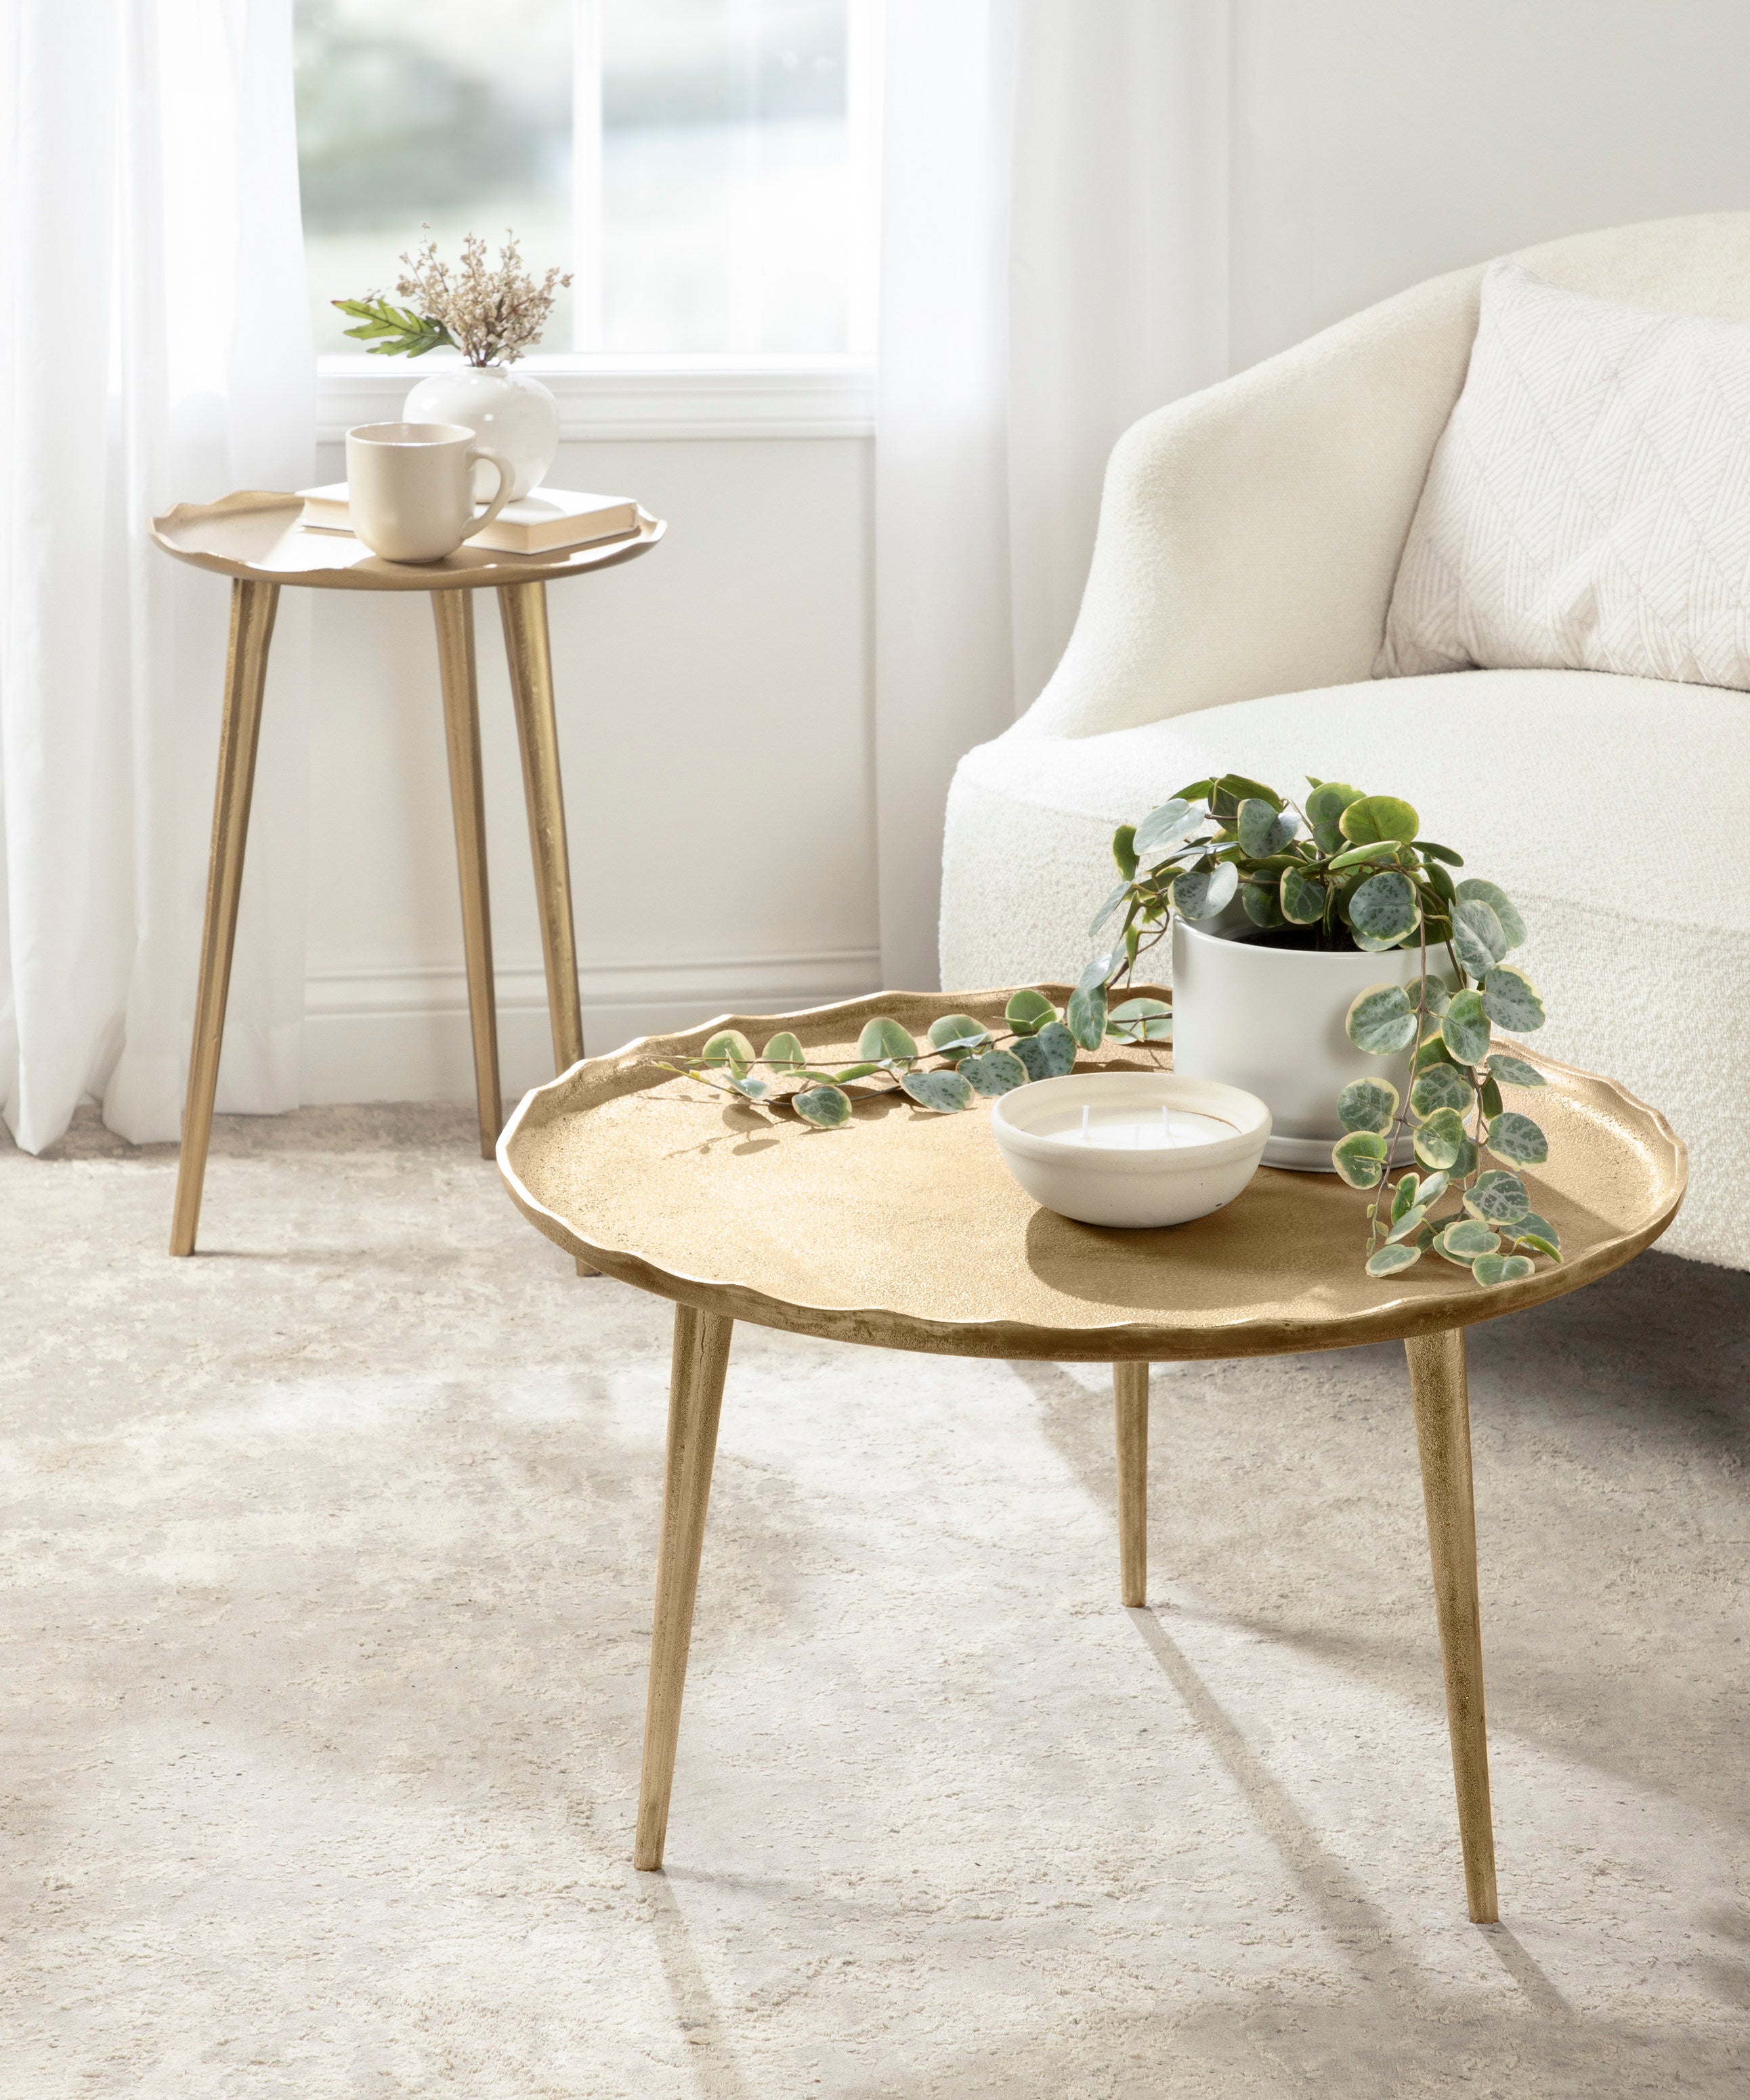 Alessia Round Coffee Table